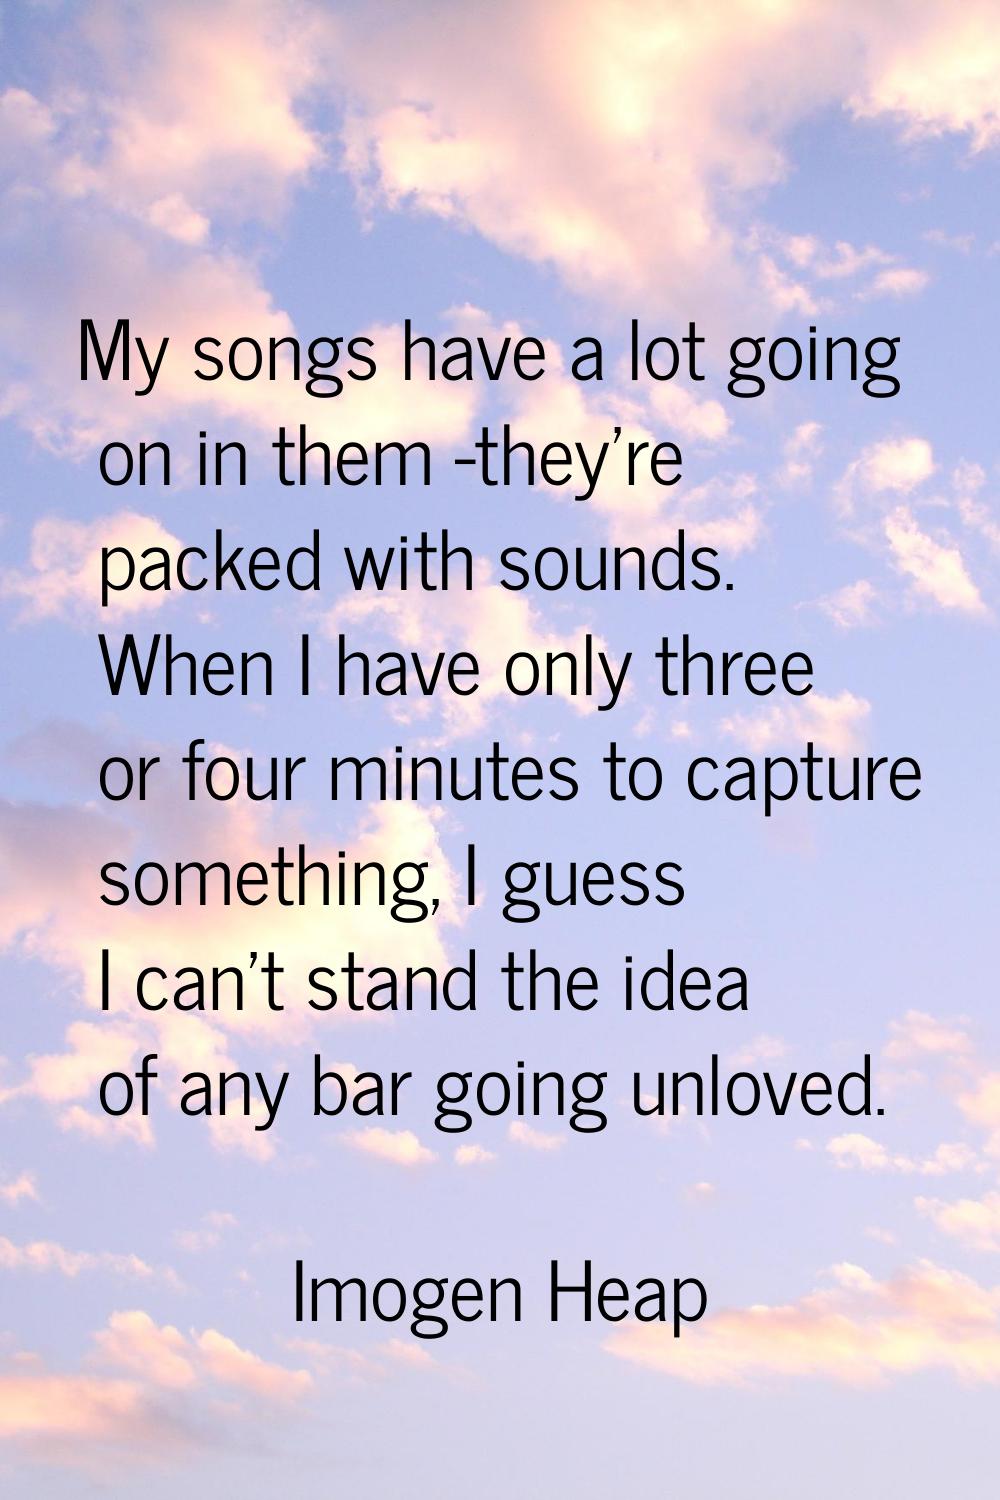 My songs have a lot going on in them -they're packed with sounds. When I have only three or four mi